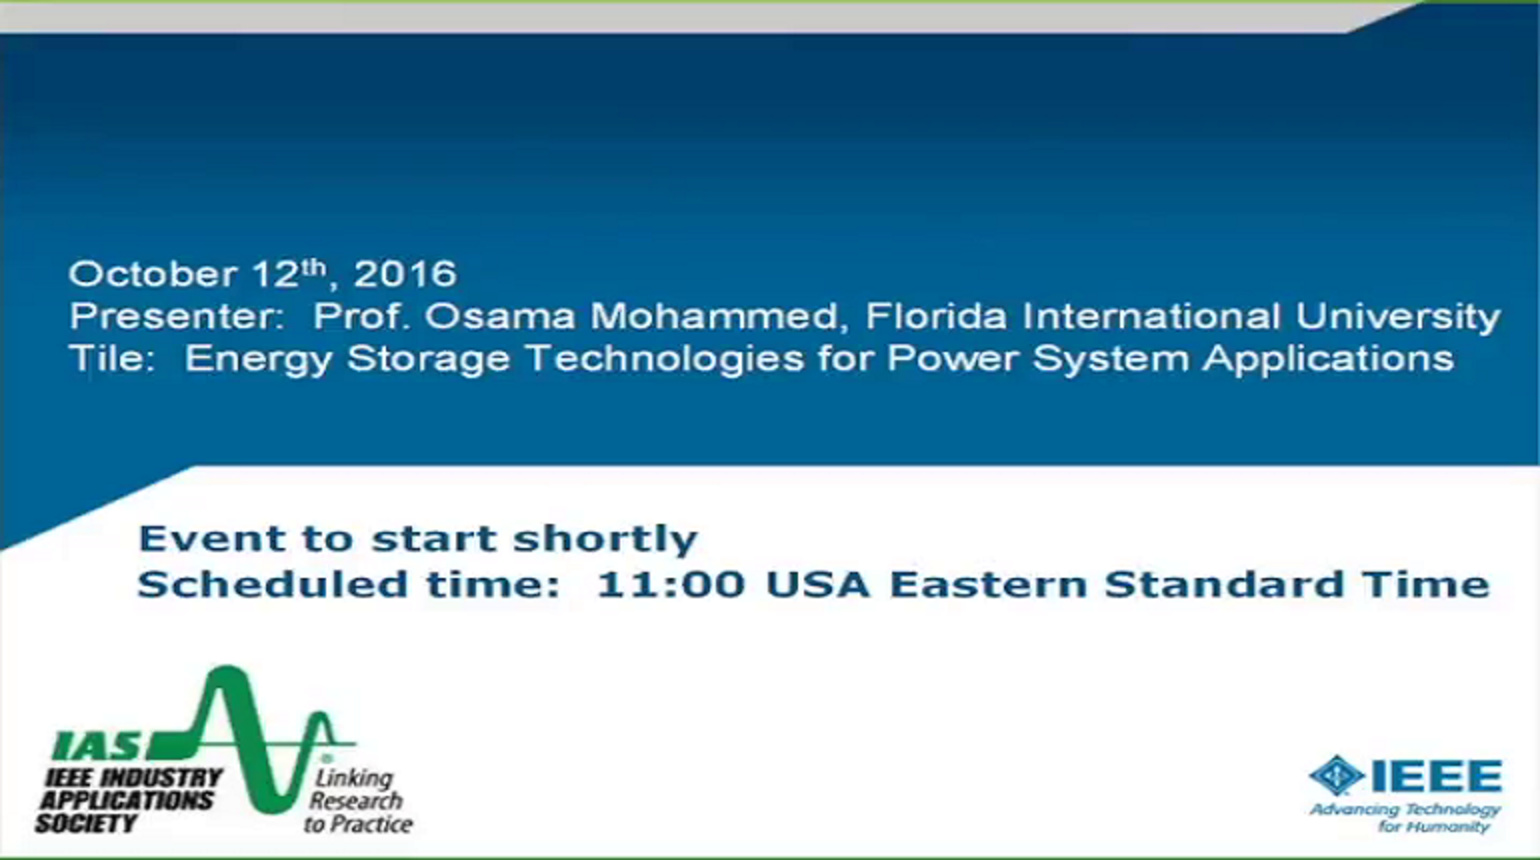 Energy Storage Technologies for Power System Applications